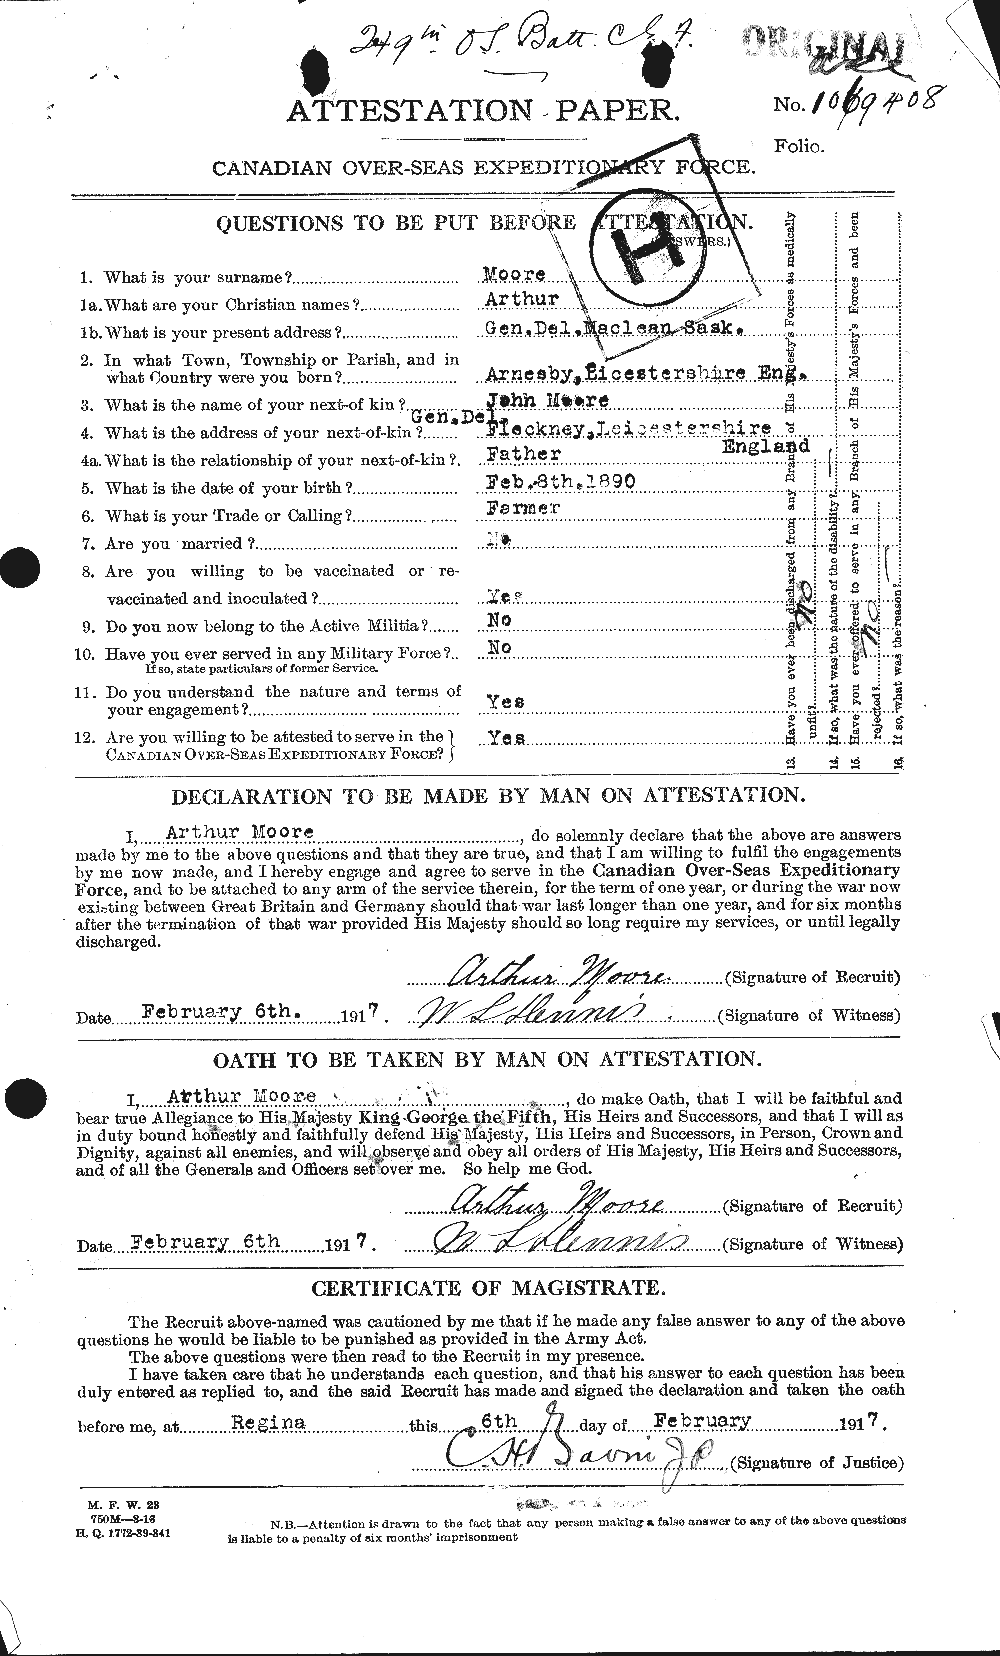 Personnel Records of the First World War - CEF 506432a